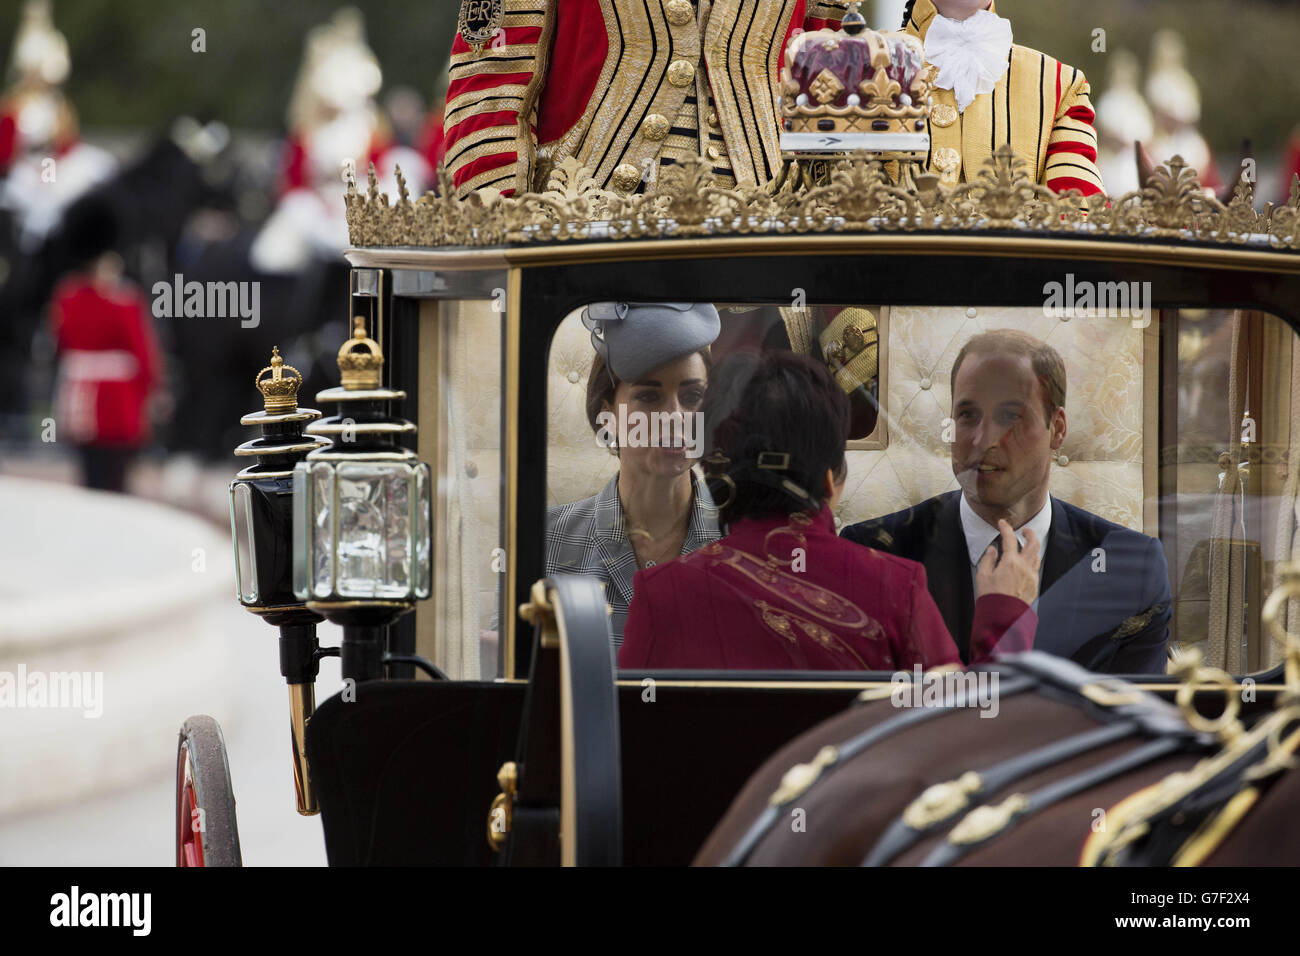 The Duke and Duchess of Cambridge with Singapore's Grace Fu Hai Yien, a Minister in the Singapore Prime Minister's Office, Second Minister for the Environment and Water Resources and Second Minister for Foreign Affairs as they arrive in a horse-drawn carriage at Buckingham Palace in London on the first of a four day state visit to Britain by the President of Singapore Tony Tan Keng Yam. Stock Photo